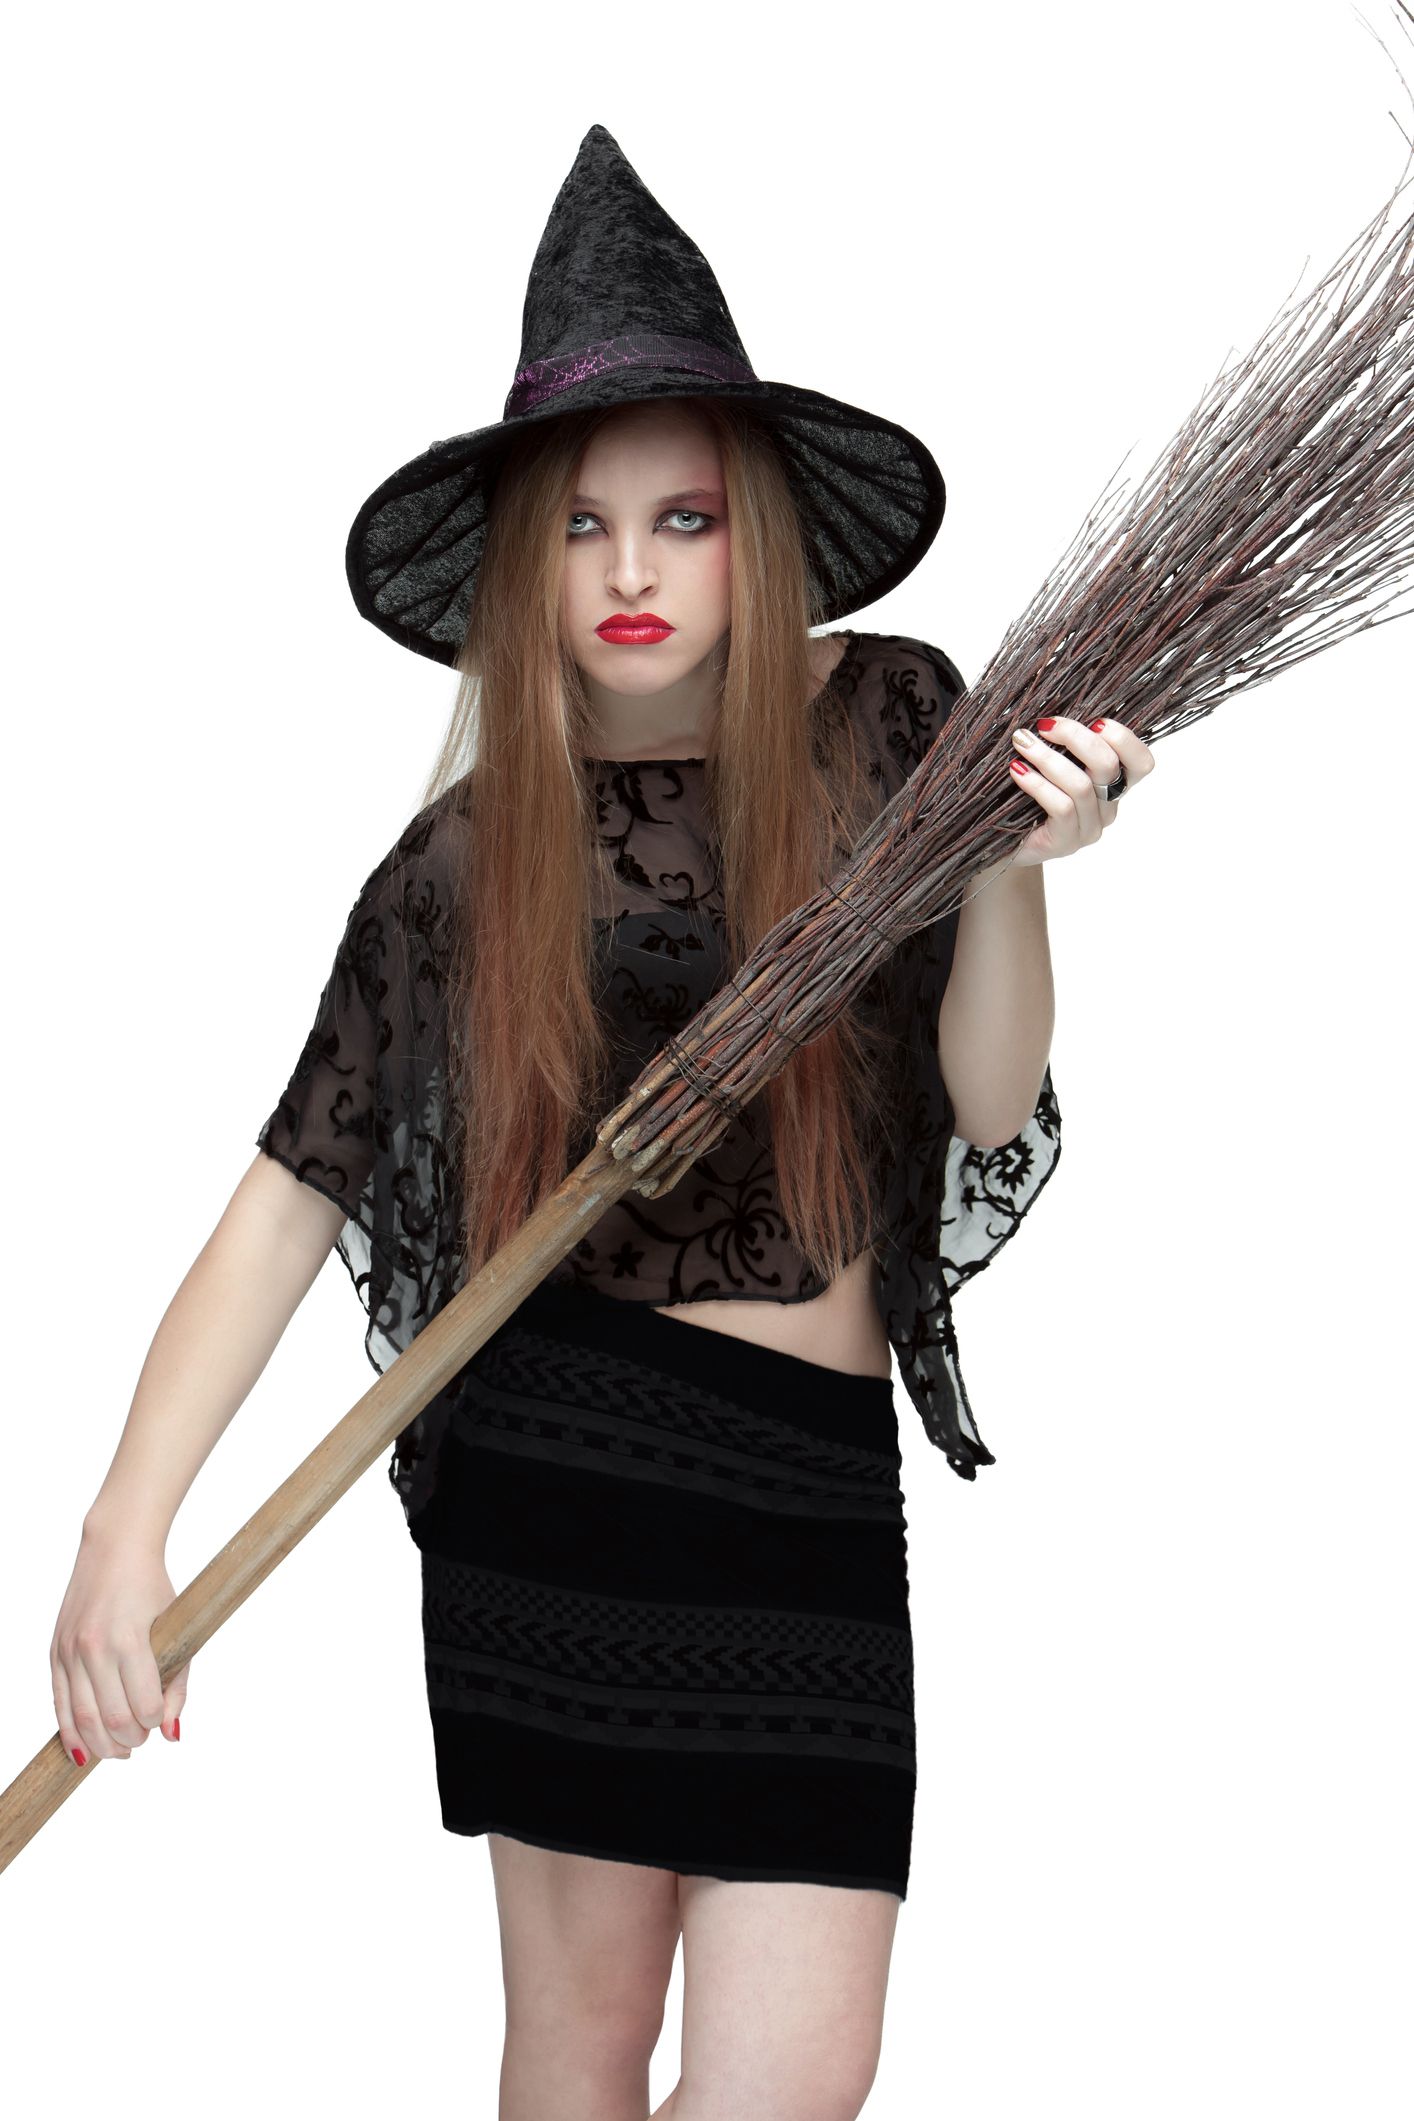 17 Easy DIY Witch Costumes 2021 picture pic picture